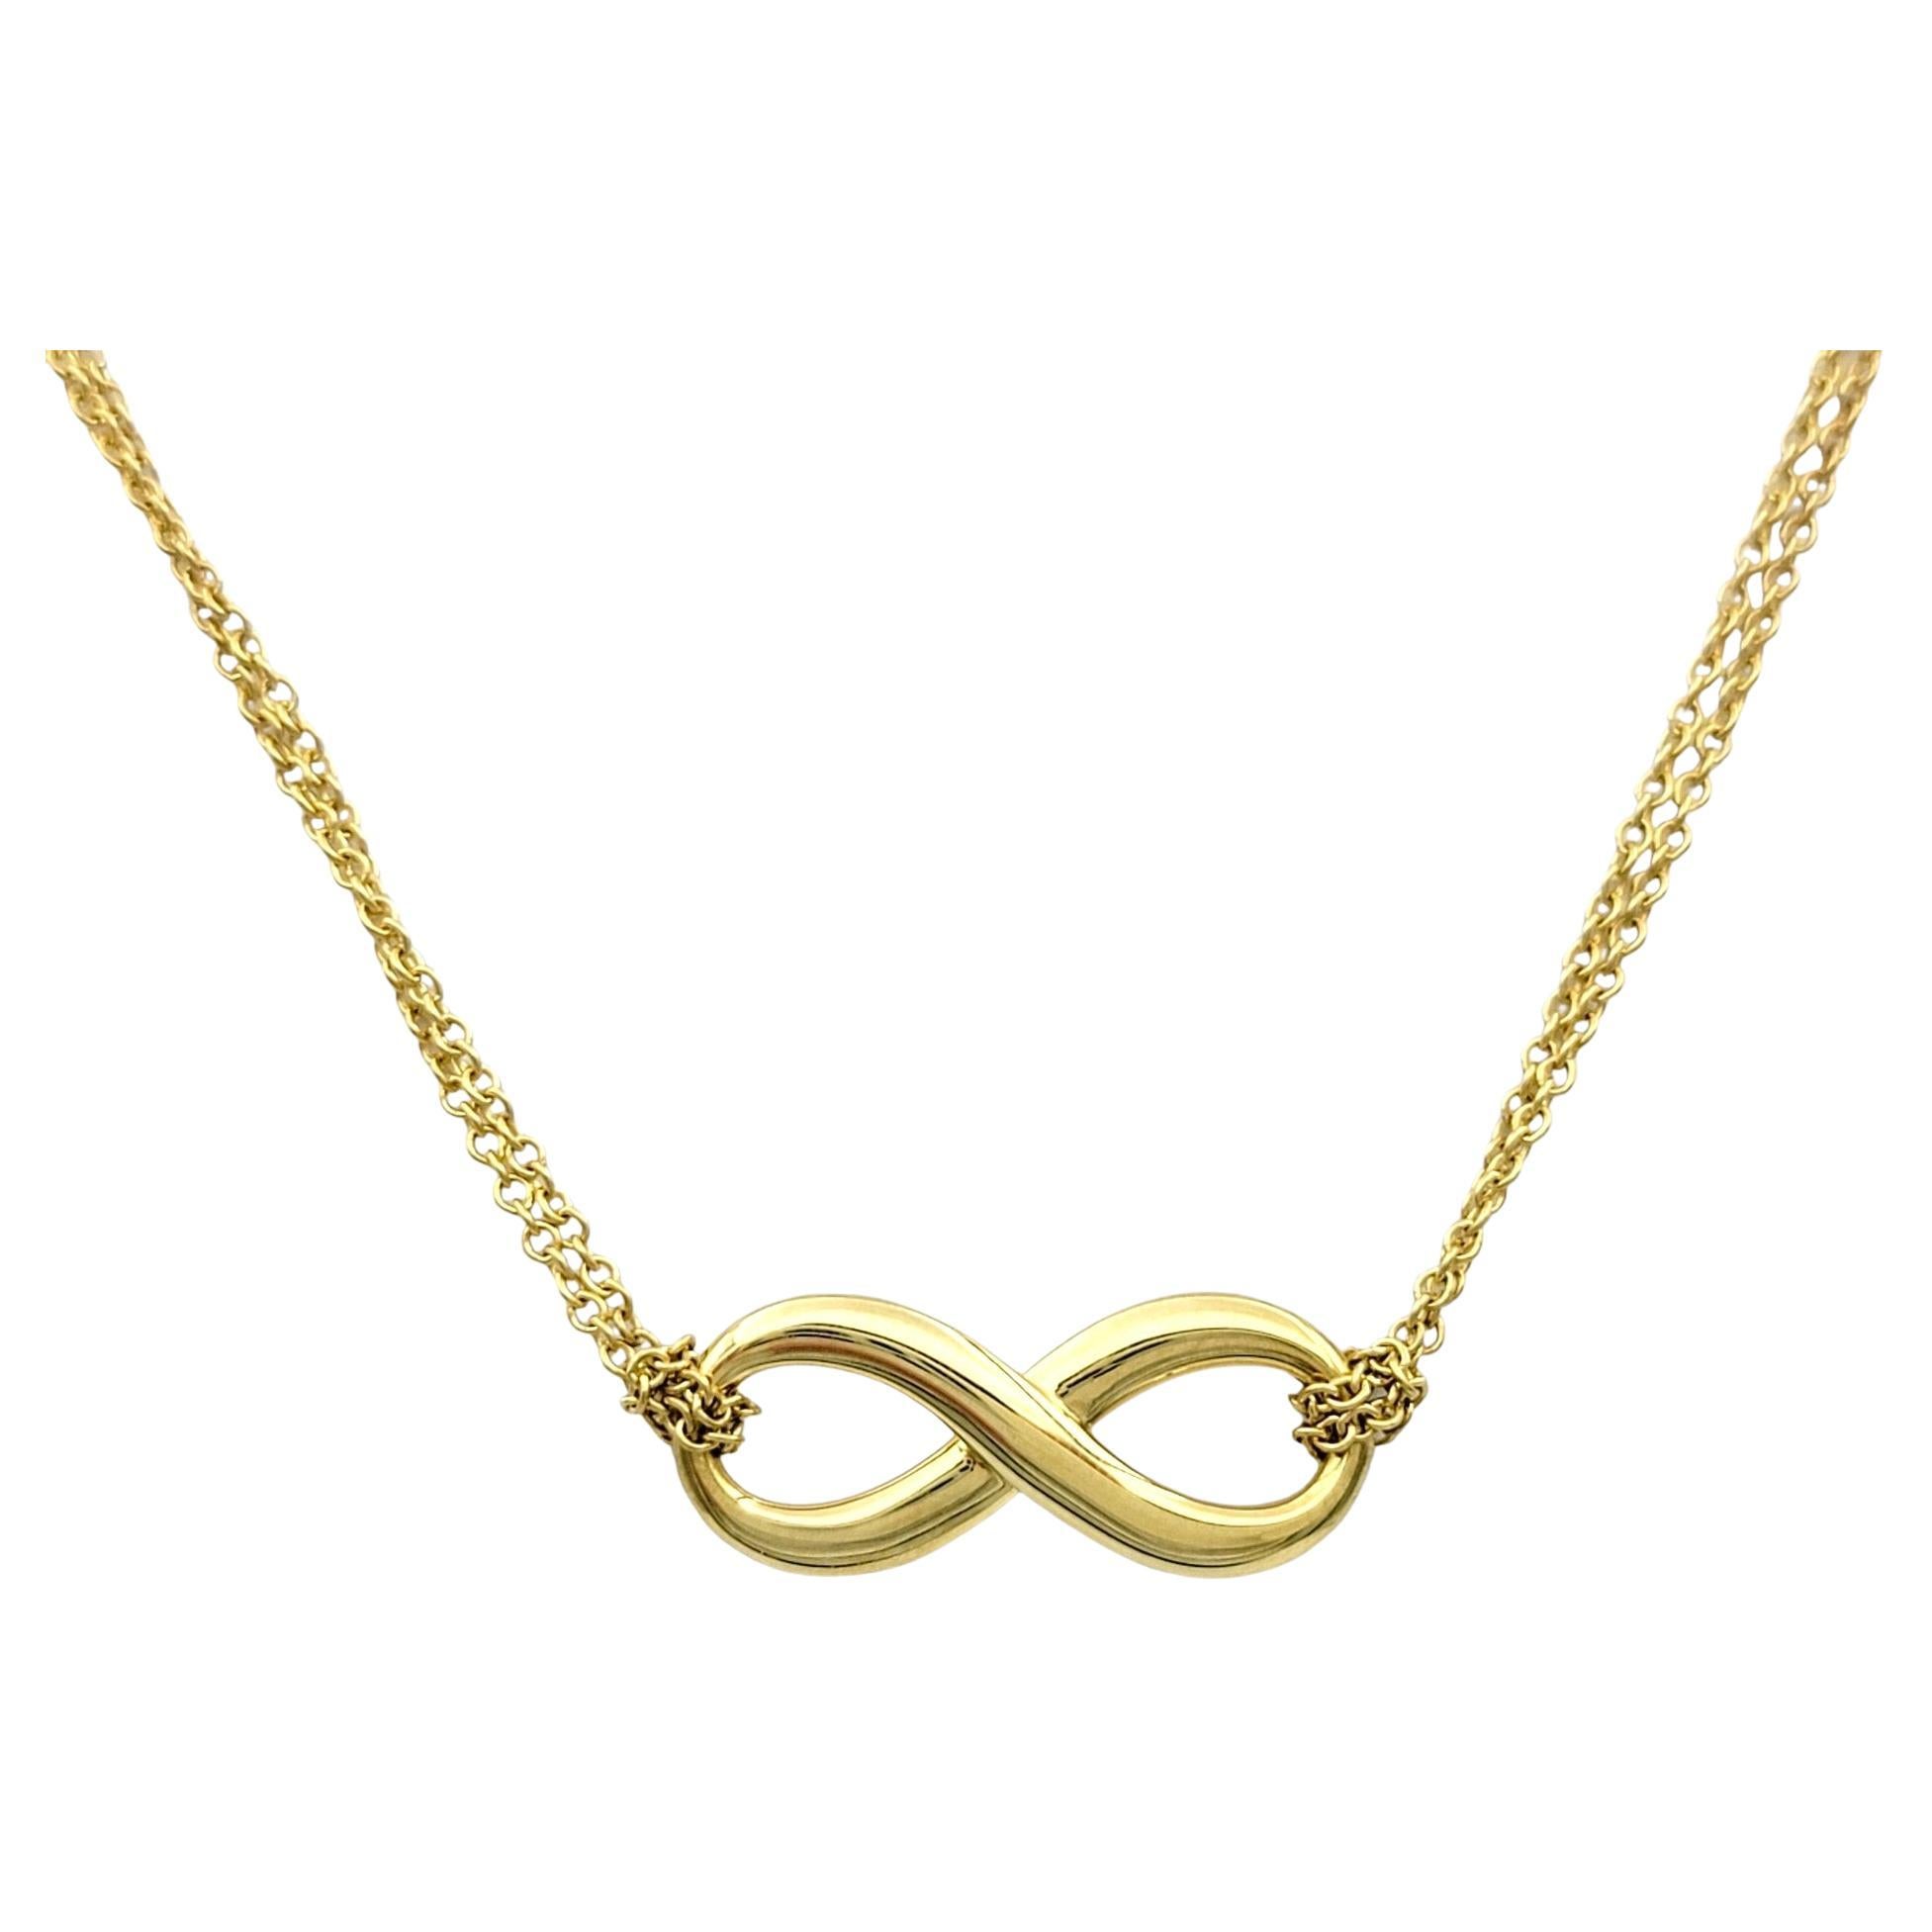 Tiffany & Co. Double Chain Infinity Pendant Necklace Set in 18 Karat Yellow Gold For Sale